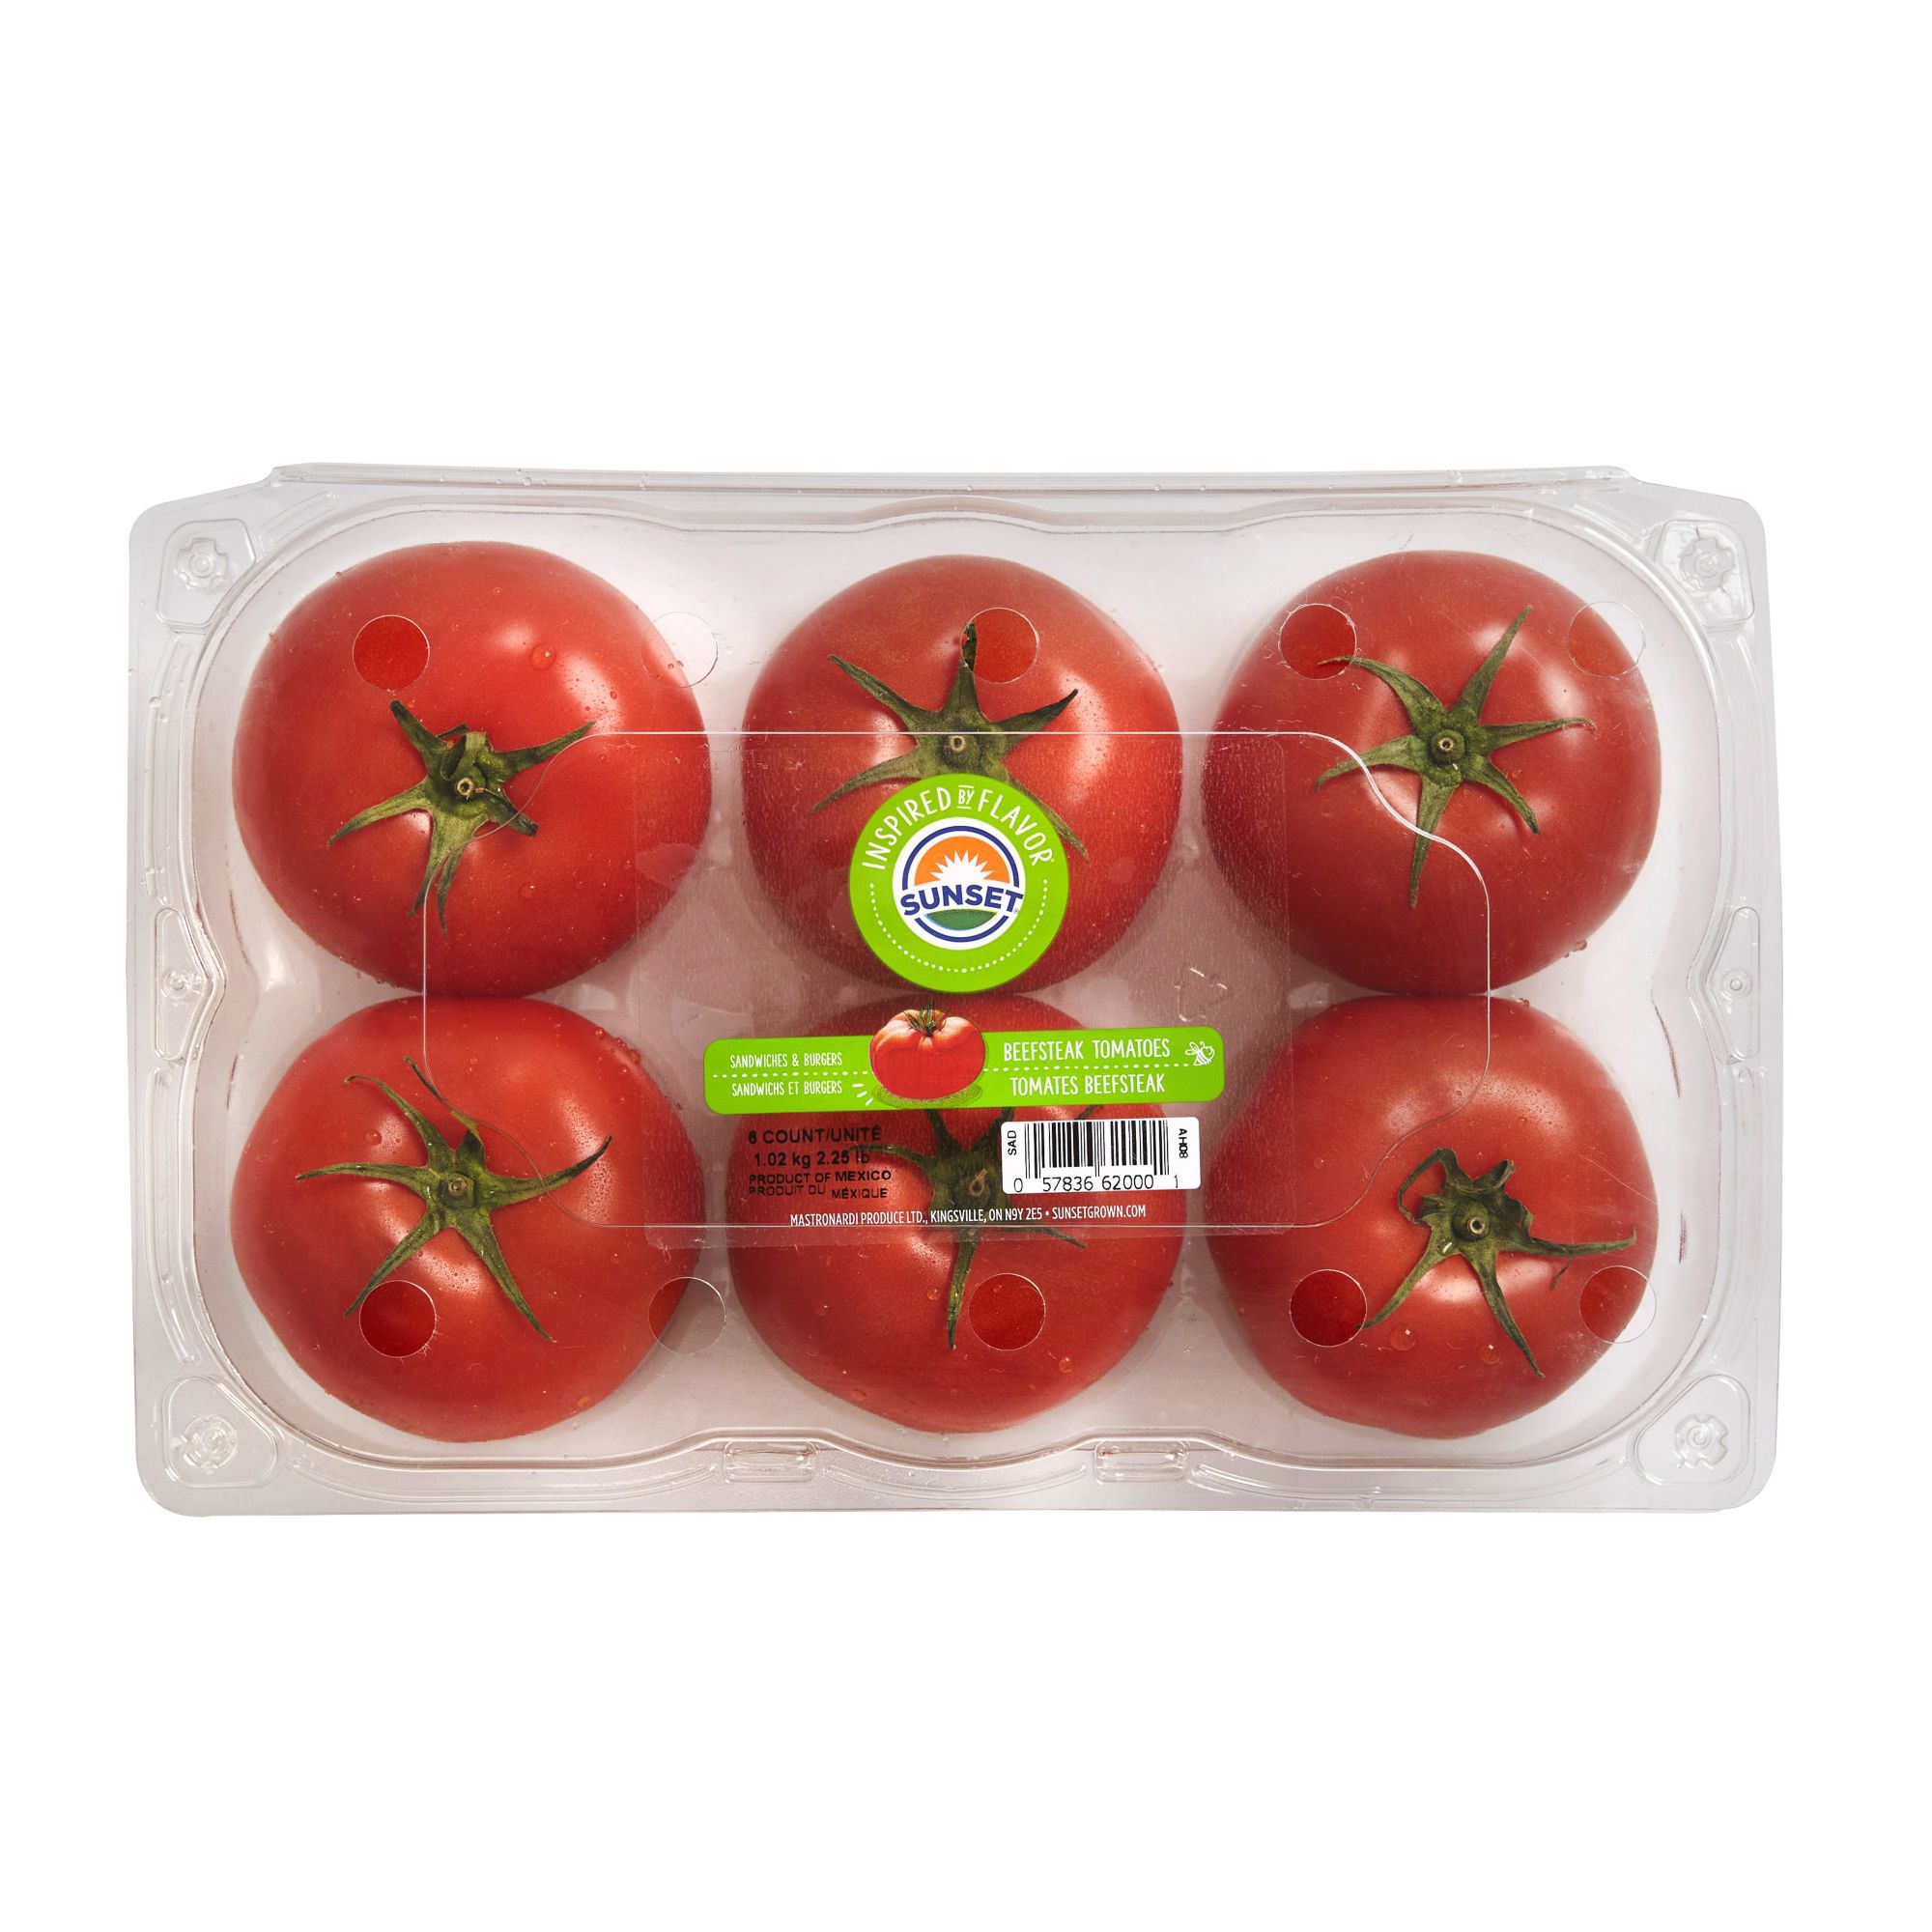 Beef Steak Tomato $1.95 Per lb - Majestic Foods - Patchogue New York  Wholesale Food Distributor